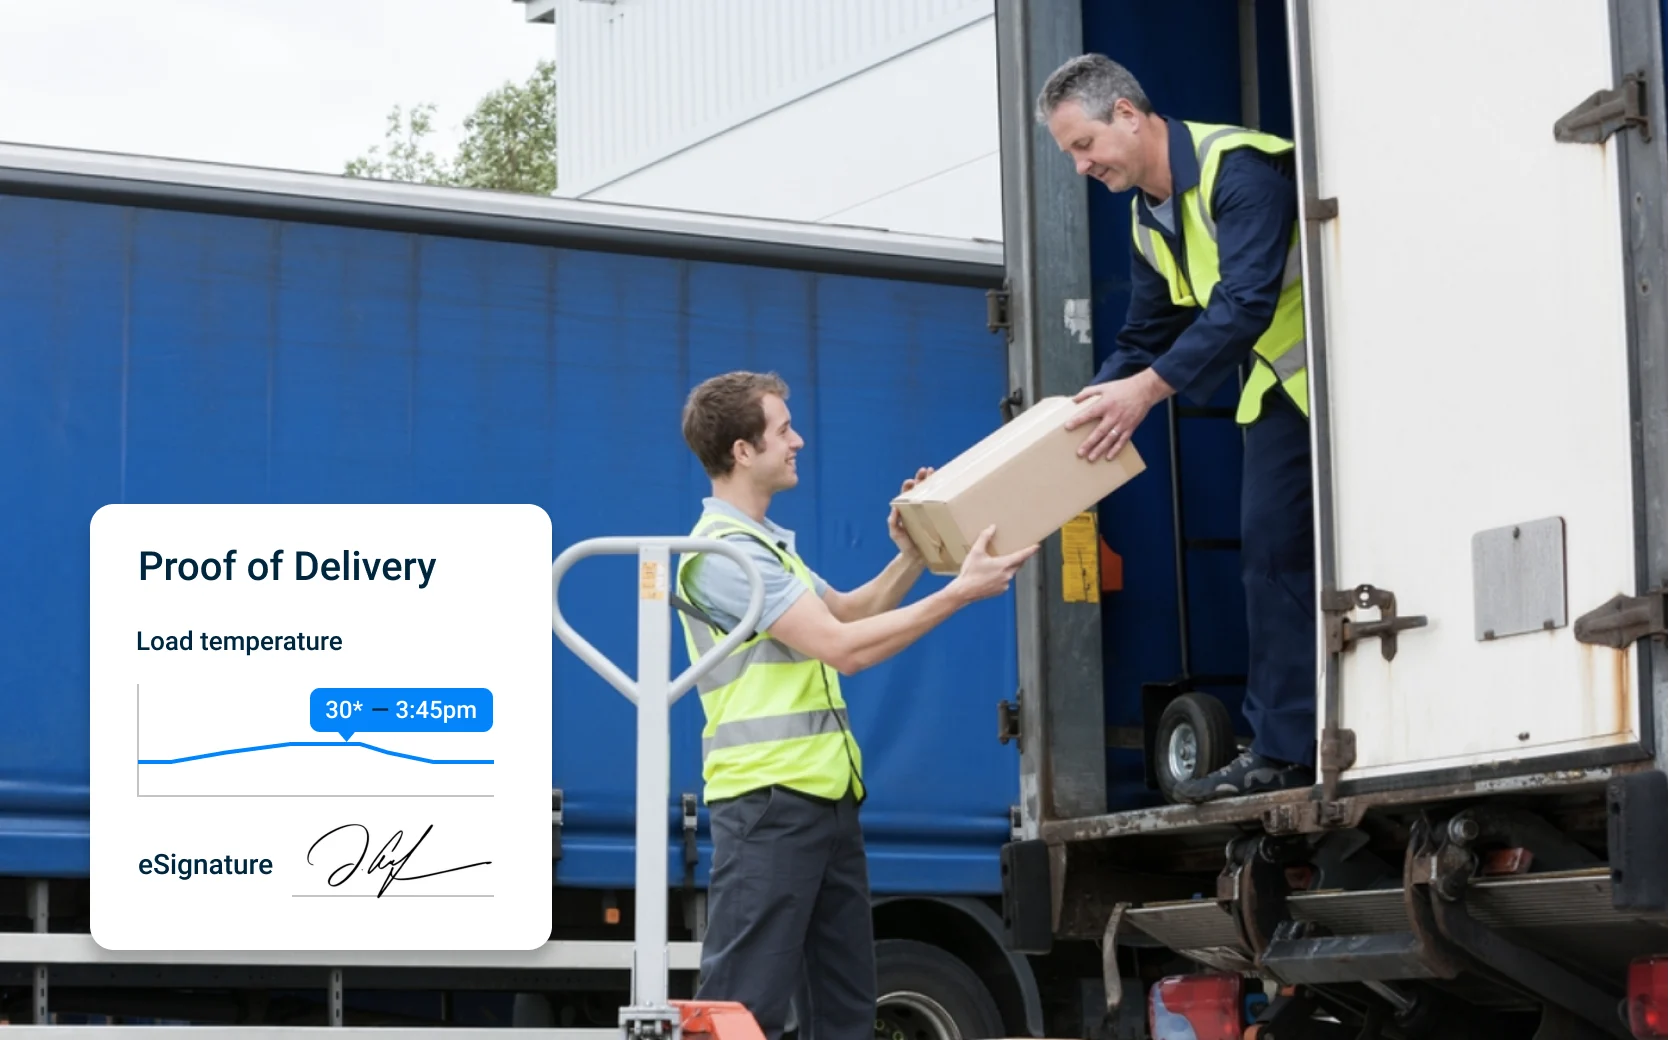 man delivering package to other worker showing proof of delivery signature